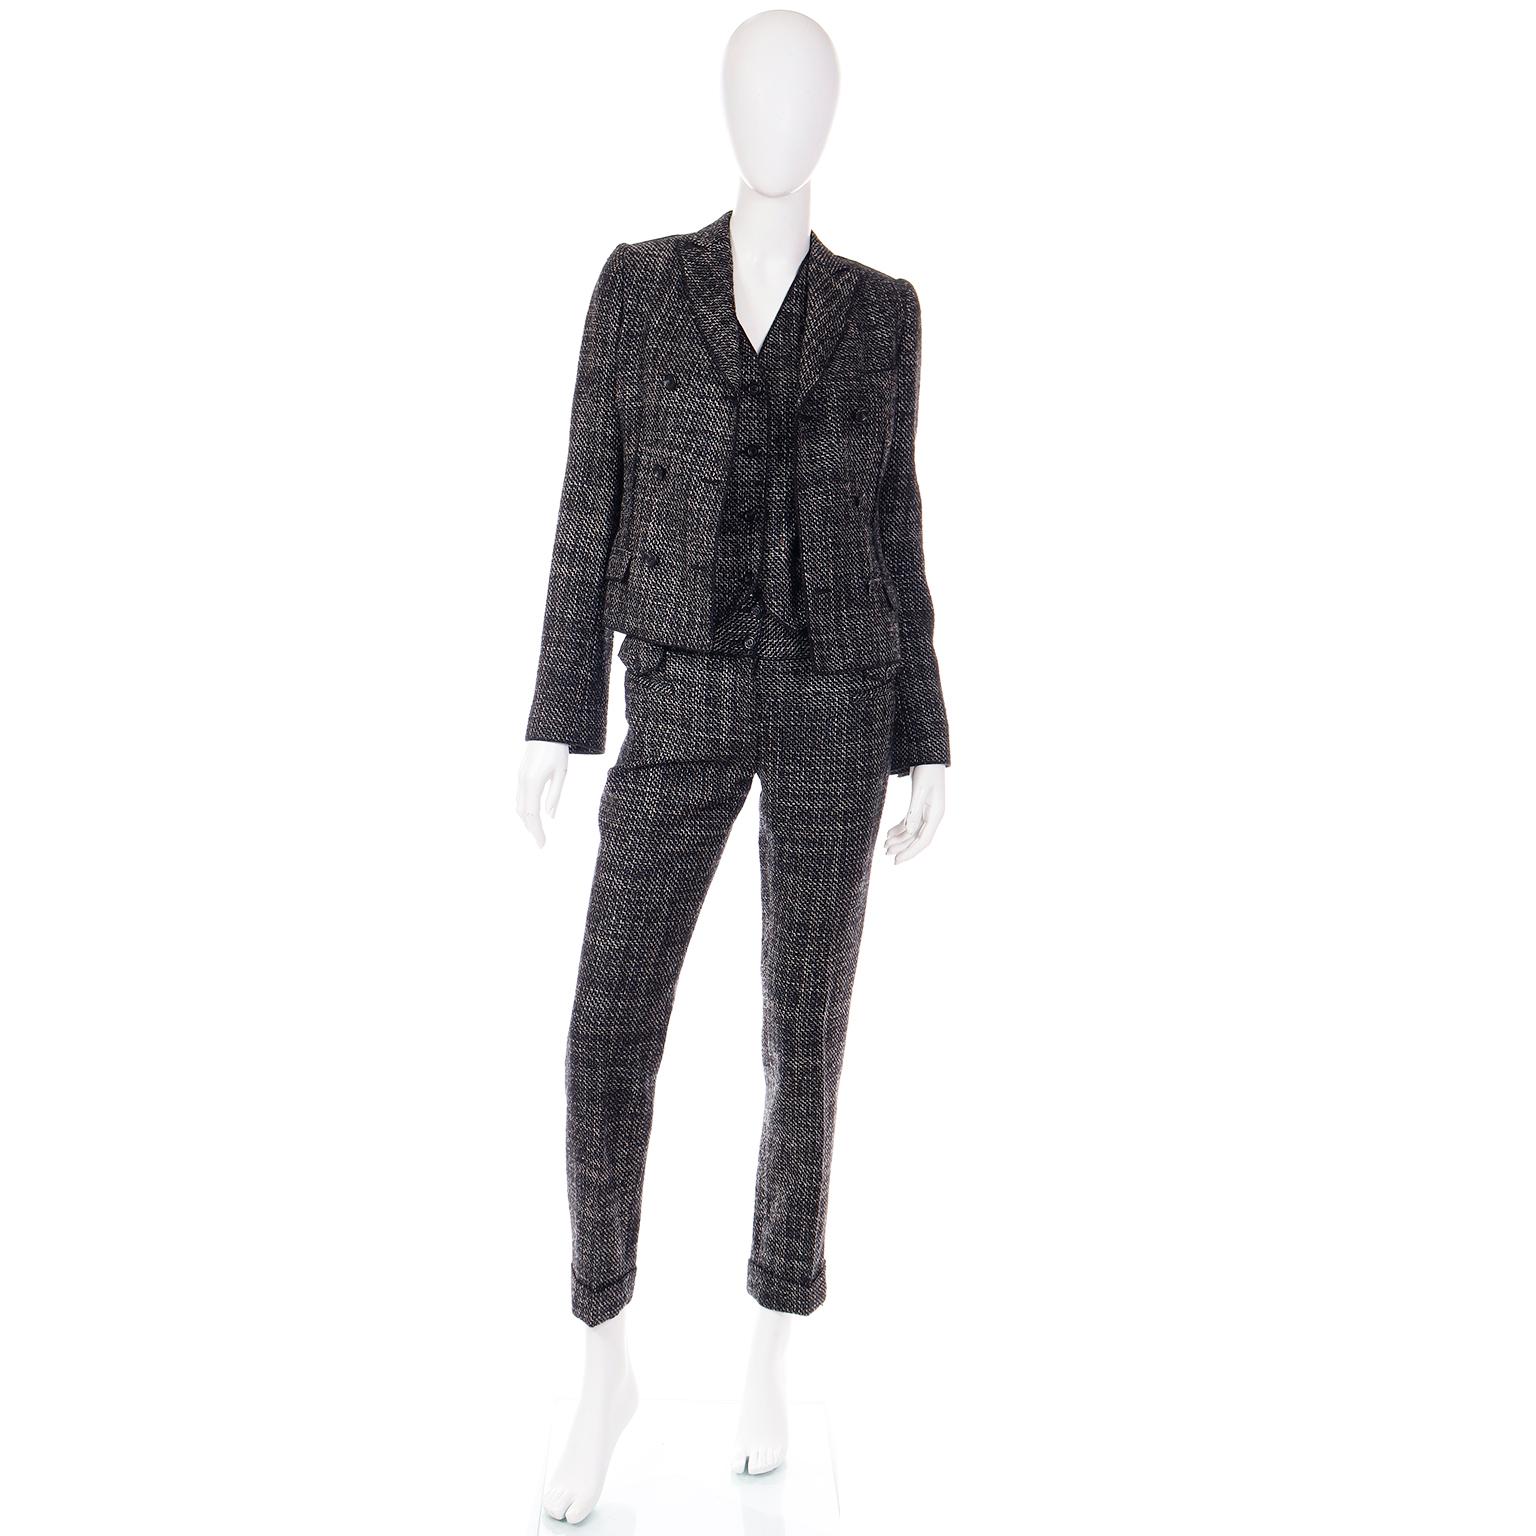 This is an early 2000's Dolce & Gabbana 3 piece white and charcoal tweed textured Nylon/Silk/Wool/Alpaca blend suit consisting of trousers, a vest, and a jacket. We love suits because they offer so many wearable options and fun ways to mix pieces